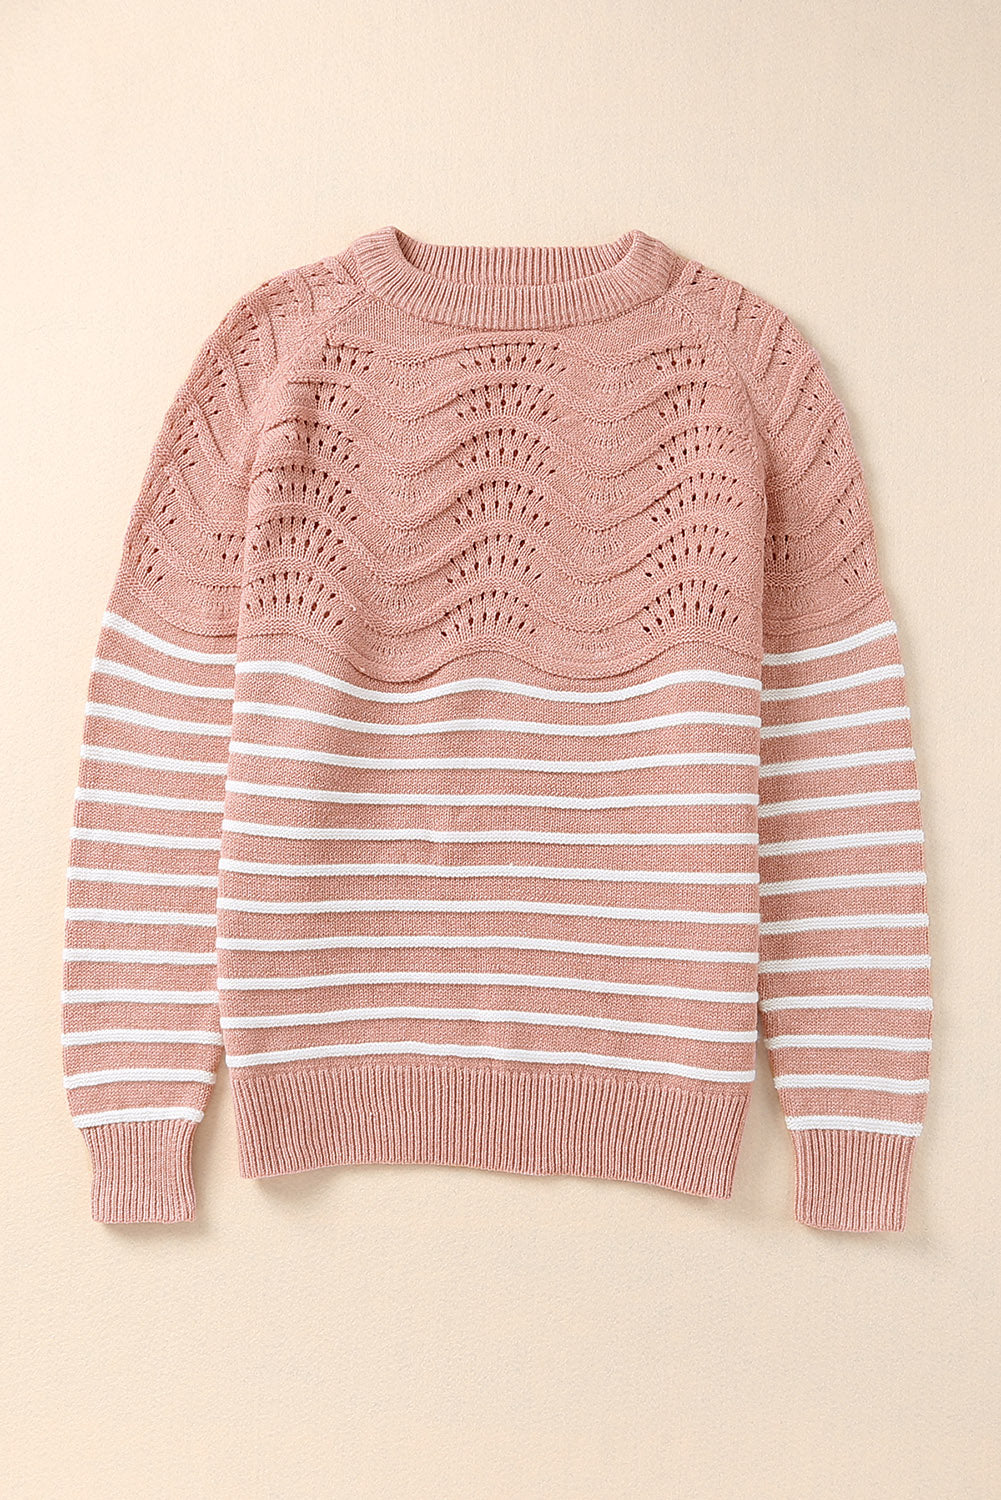 Pink Striped Textured Long Sleeve Knit Sweater